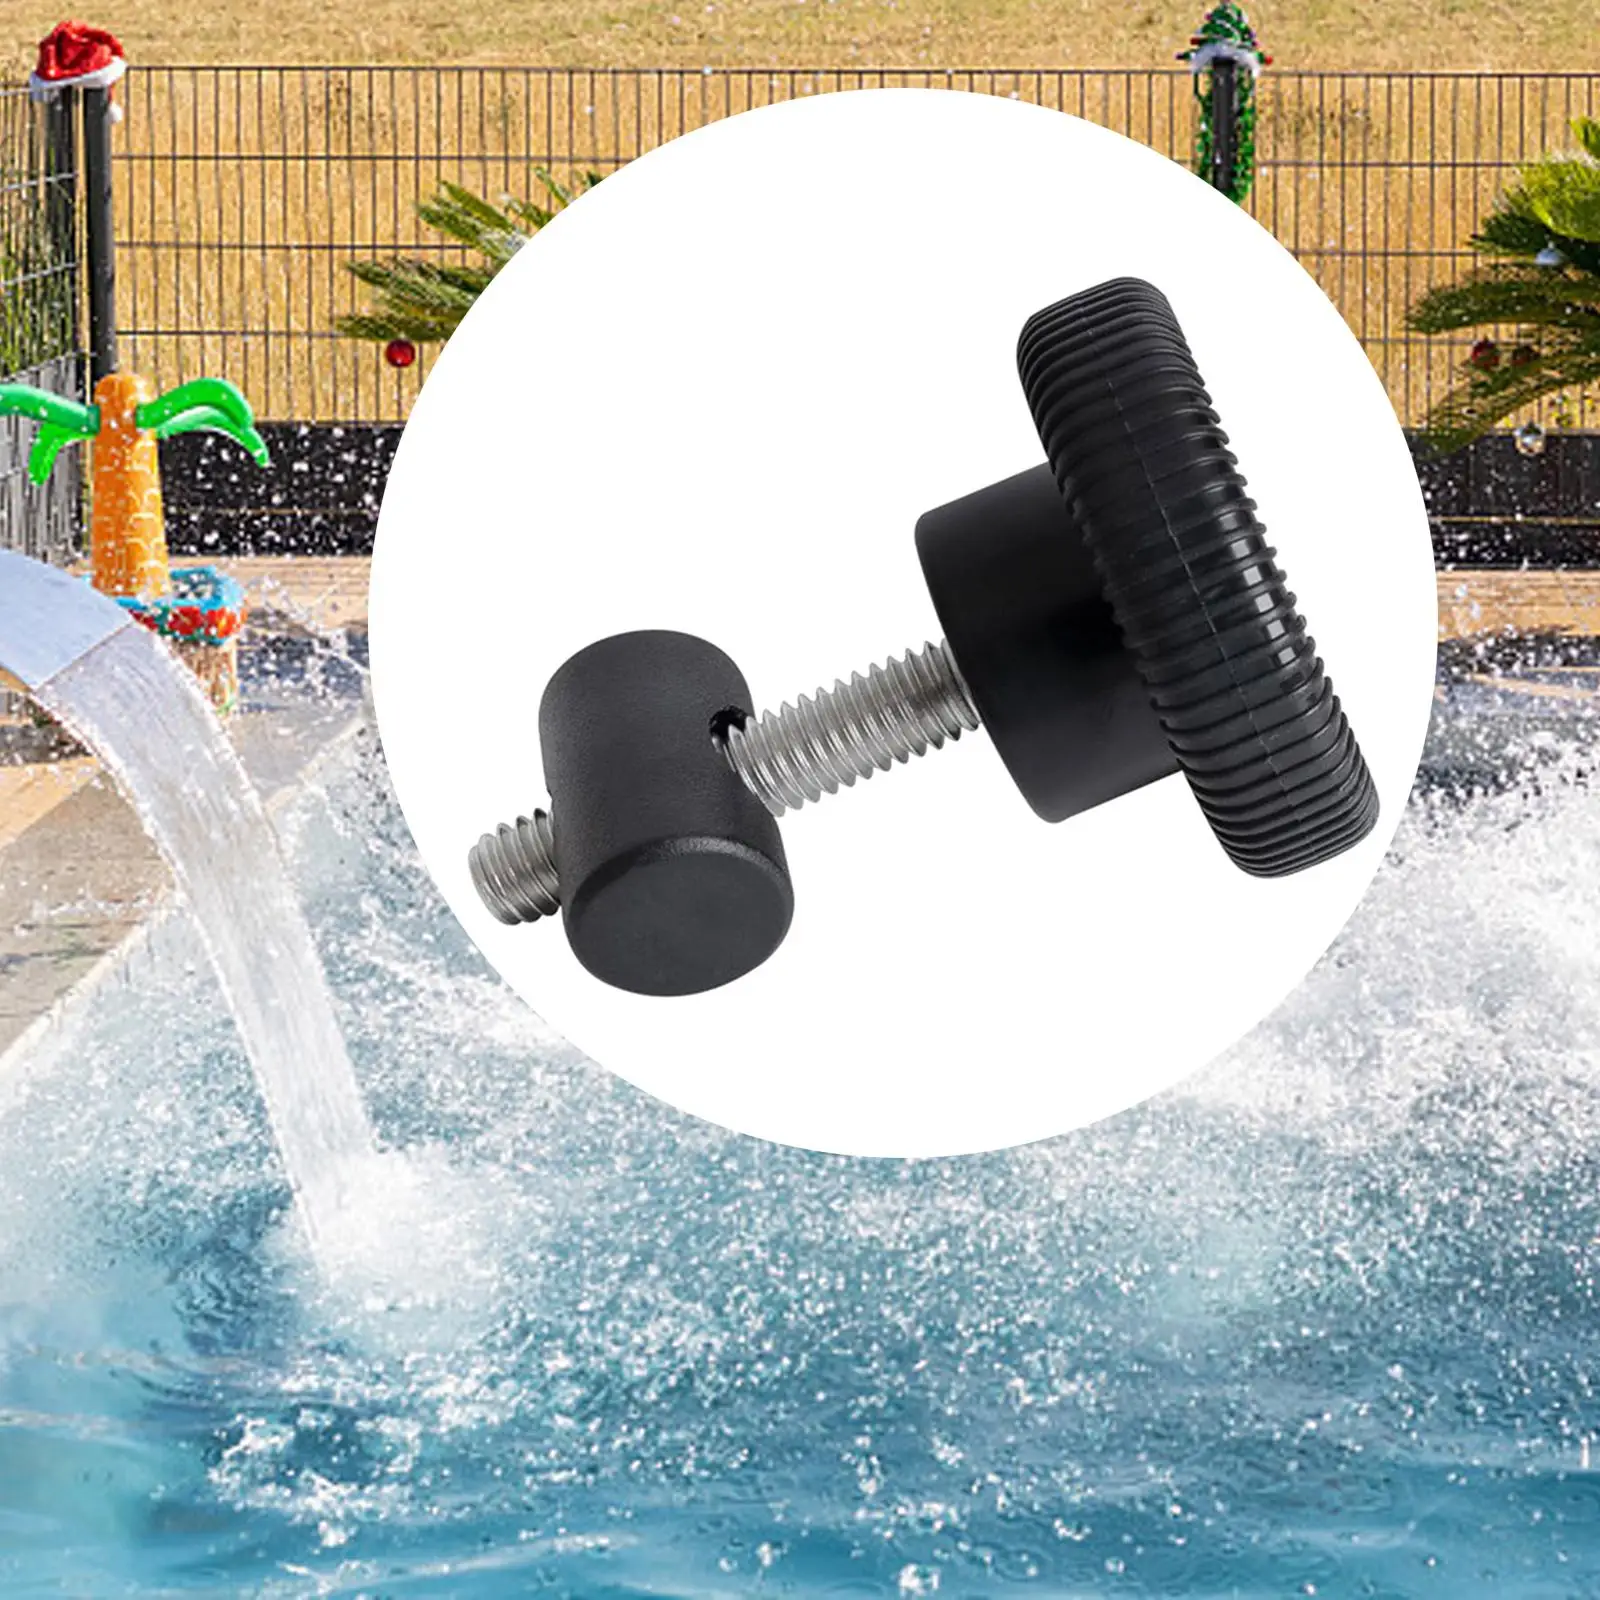 Swivel Nut and Knob Parts,Stable Performance,Premium,Knob Nut Part,Accessories for Replacement Pool Pump Swimming Pool